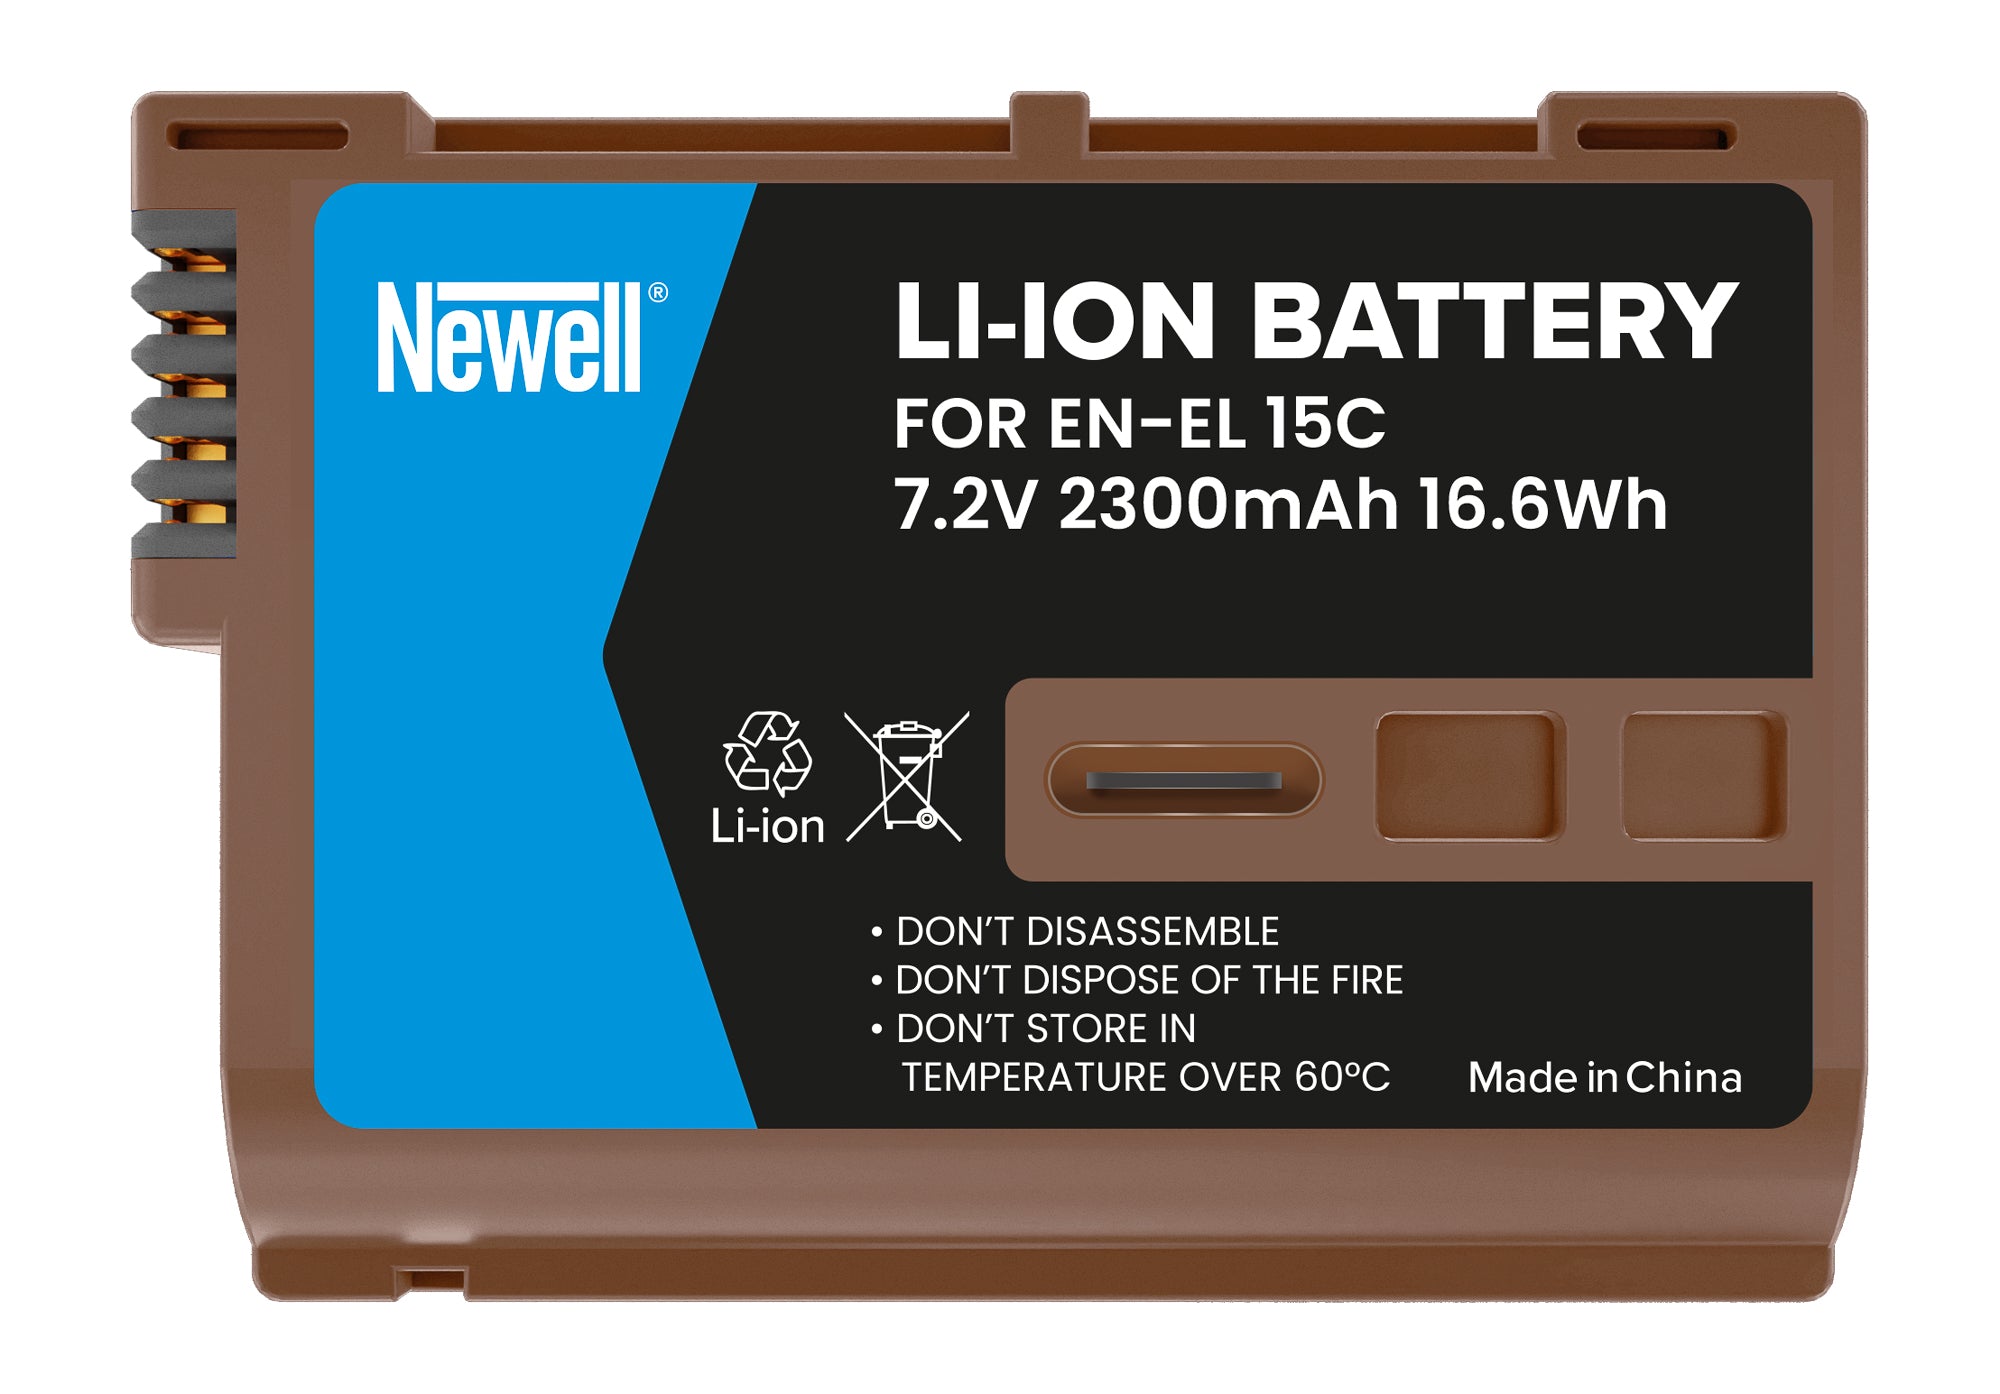 Newell Battery with USB-C onboard recharge EN-EL15C for Nikon (2300mAh)